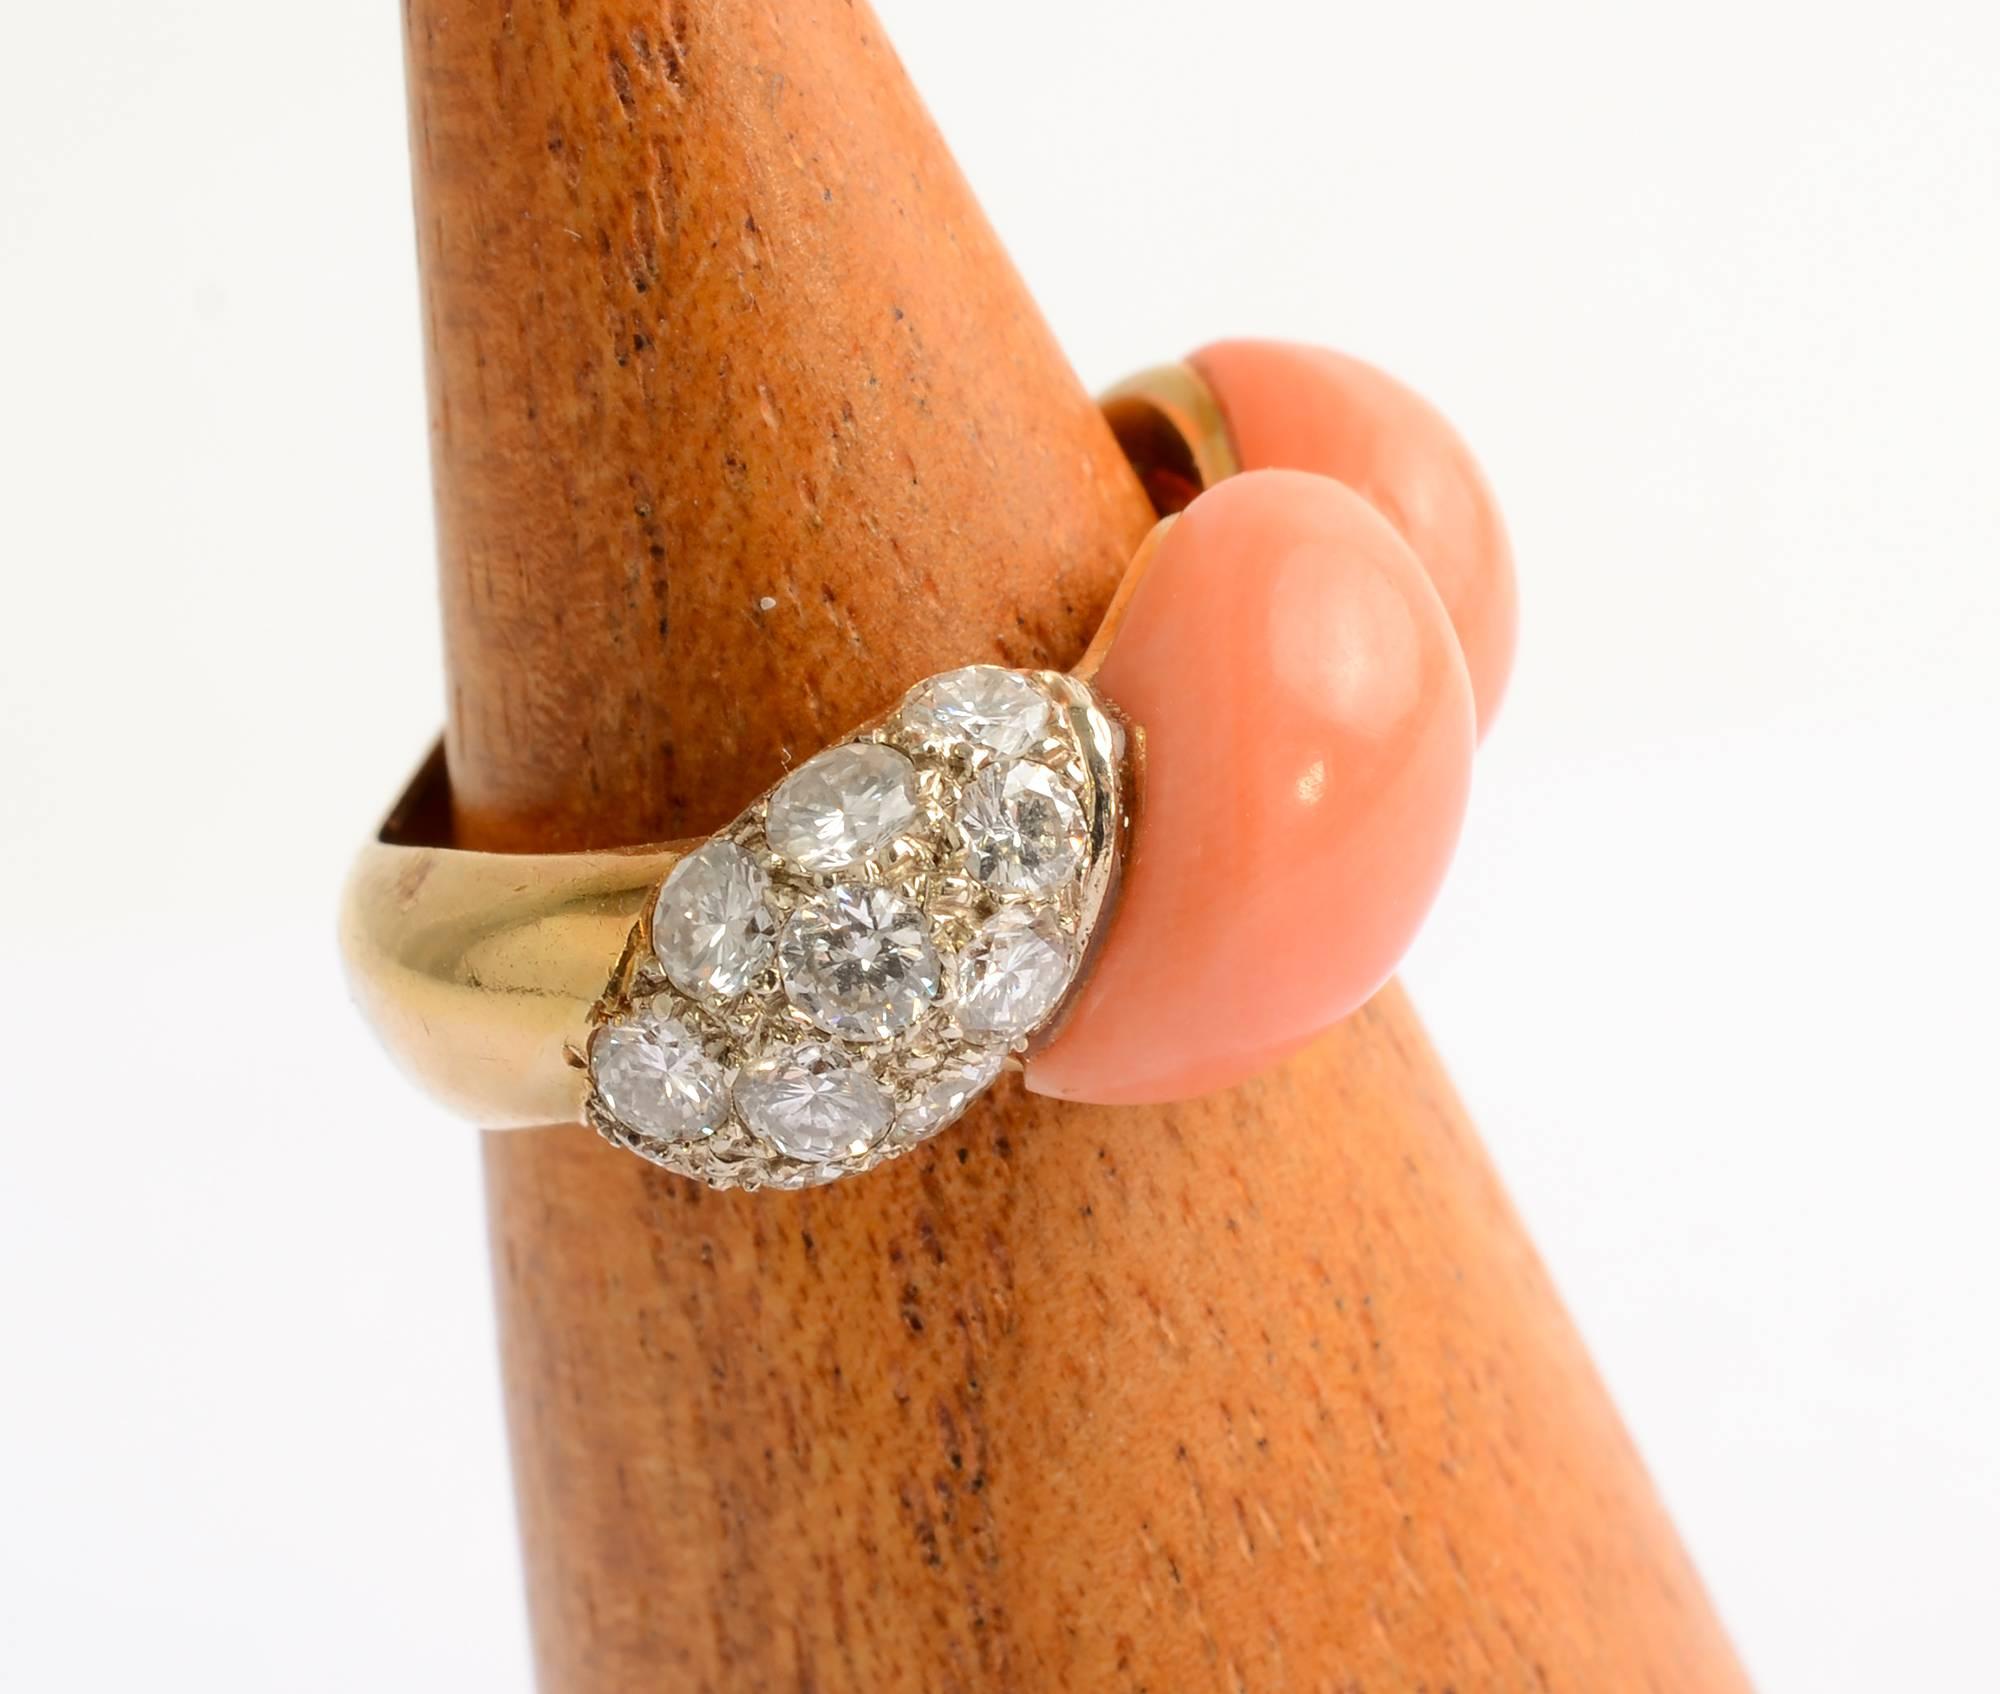 Stylish gold ring with beautifully colored coral and diamonds. The diamonds are set to echo the shape of the carved coral.
The ring is size 5 1/4 but can easily be modified. Matching earrings are available as item  LU1334123953.